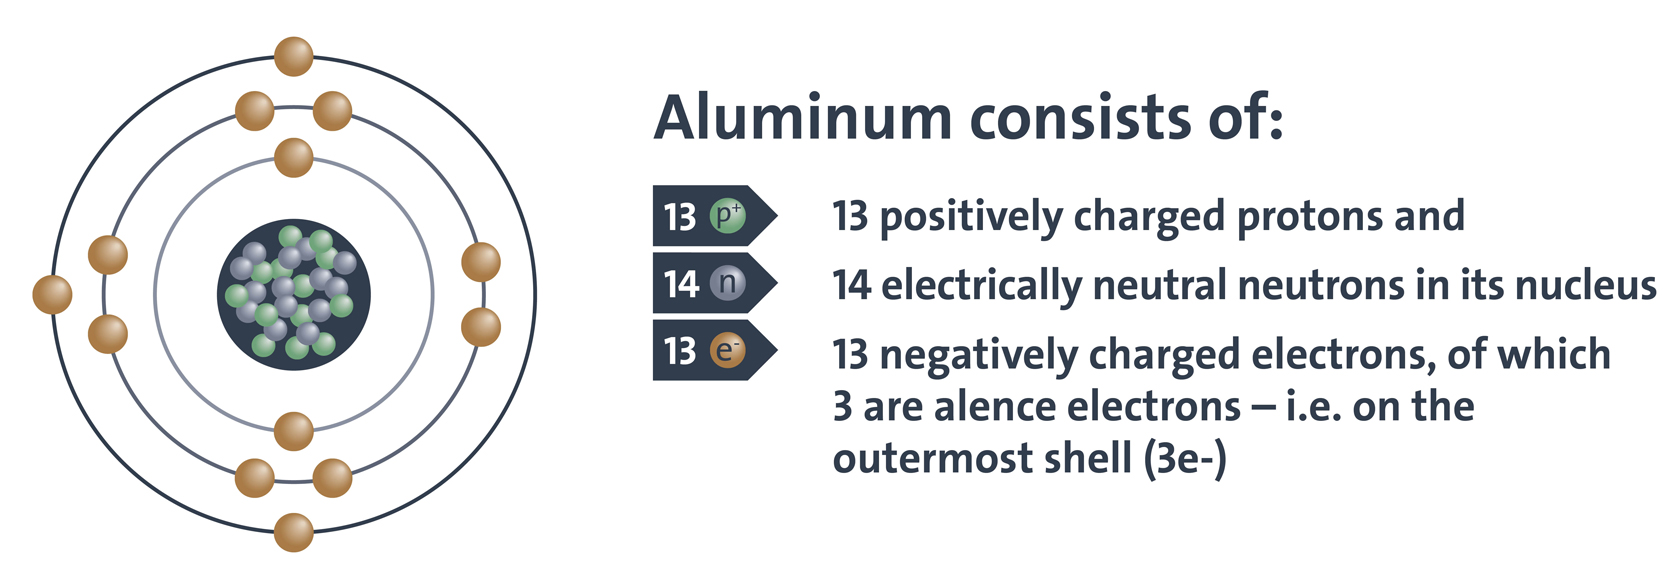 Aluminum consists of: 13 positively charged protons and 14 electrically neutral neutrons in its nucleus and 13 negatively charged electrons, of which 3 are alence electrons - i.e. on the outermost shell (3e-)